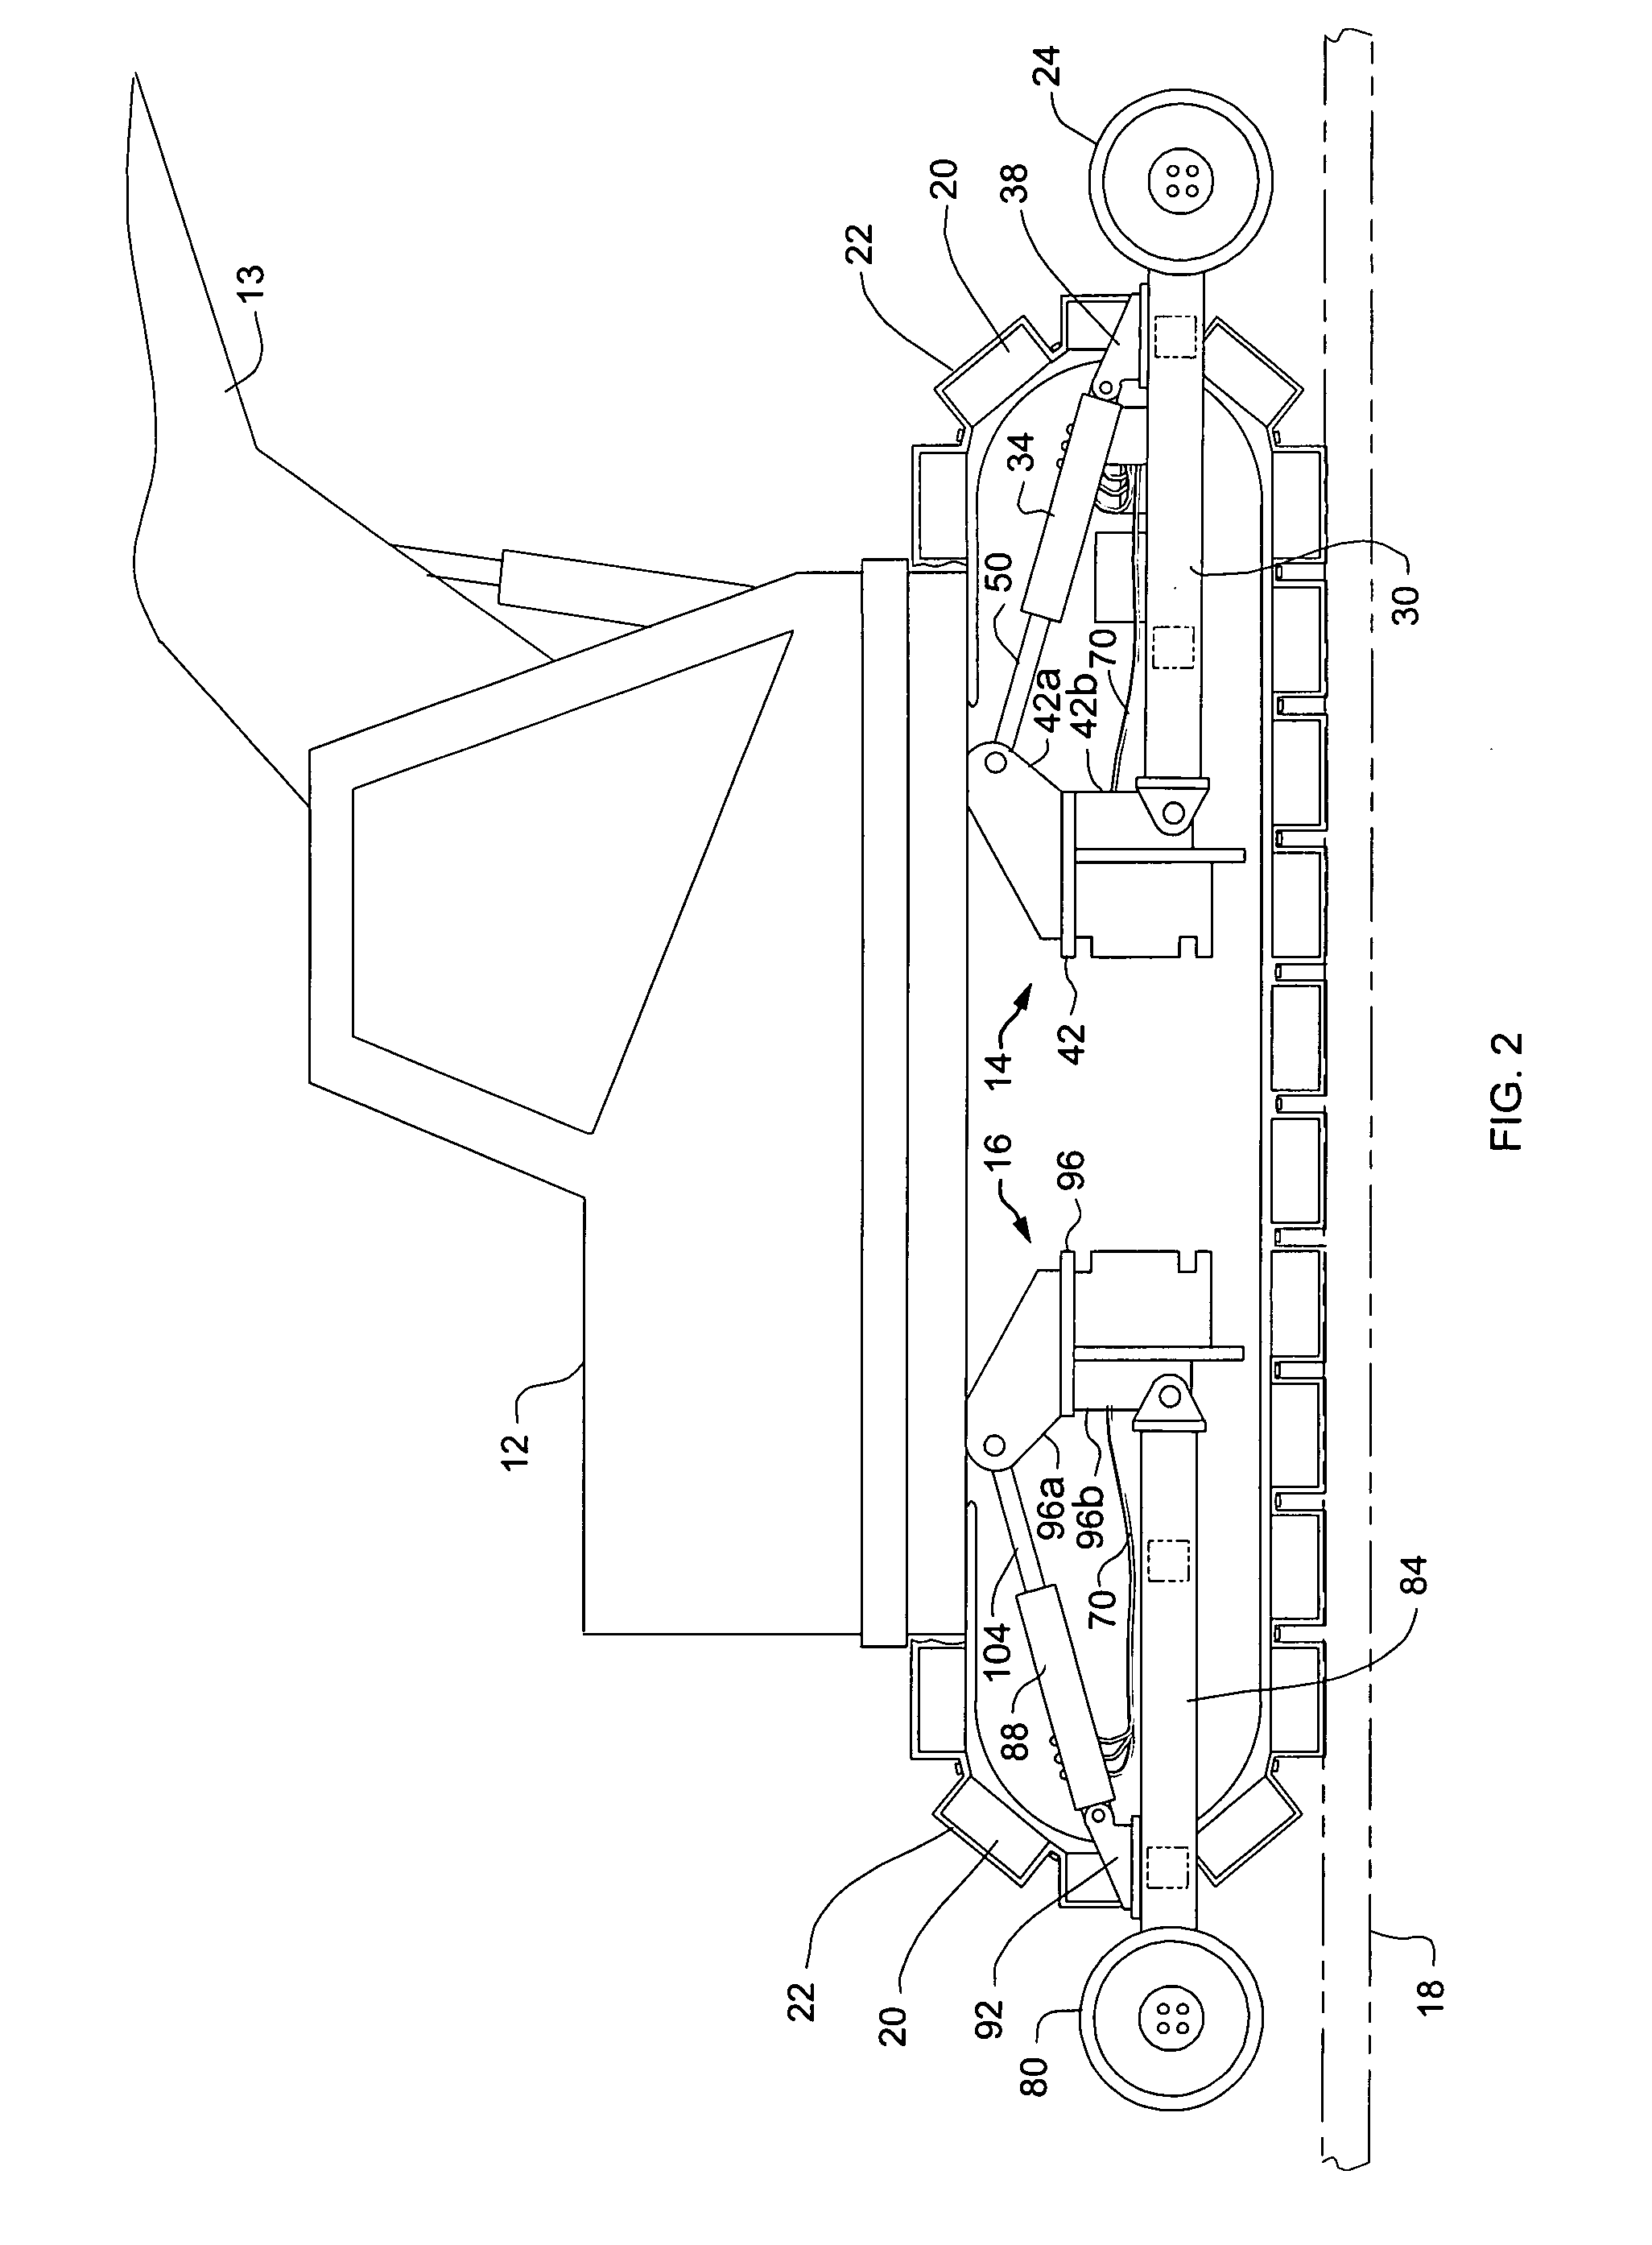 Apparatus for enabling an excavator to mount, demount and travel on railroad tracks